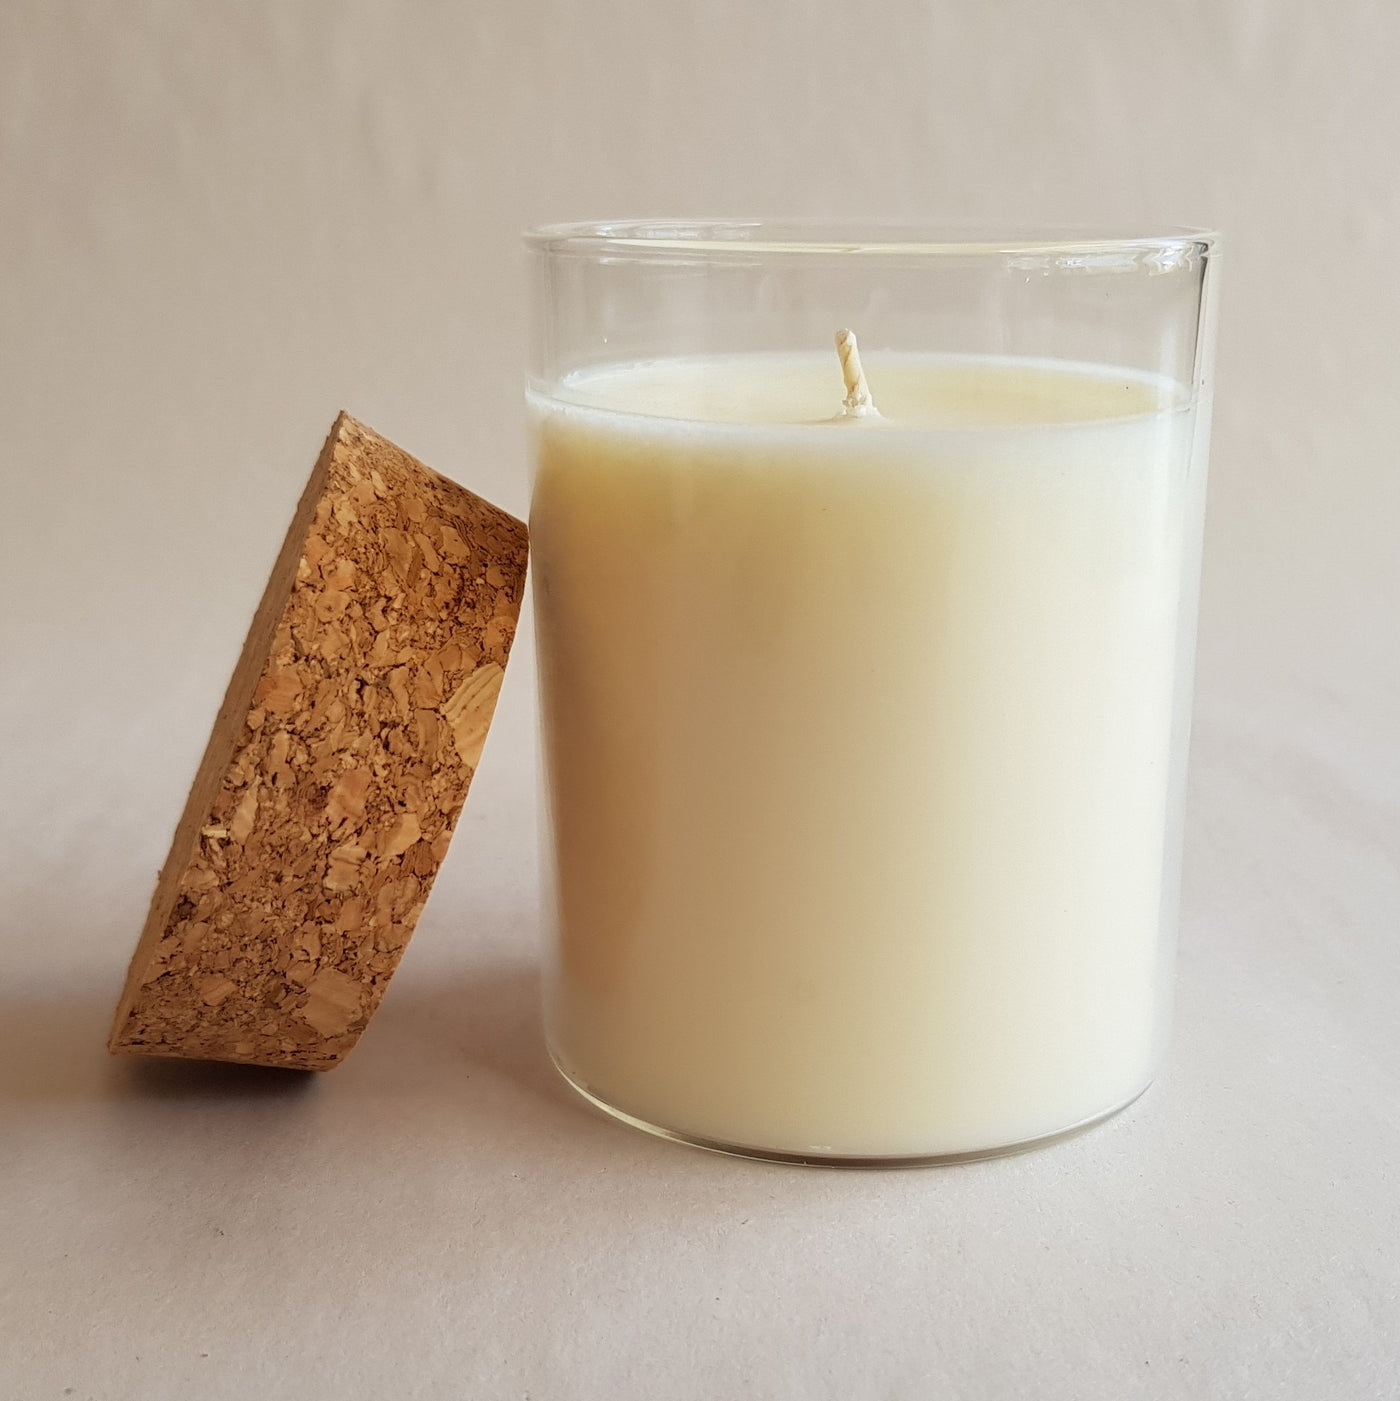 Making Container Candles using Soy Wax - CandleMaking